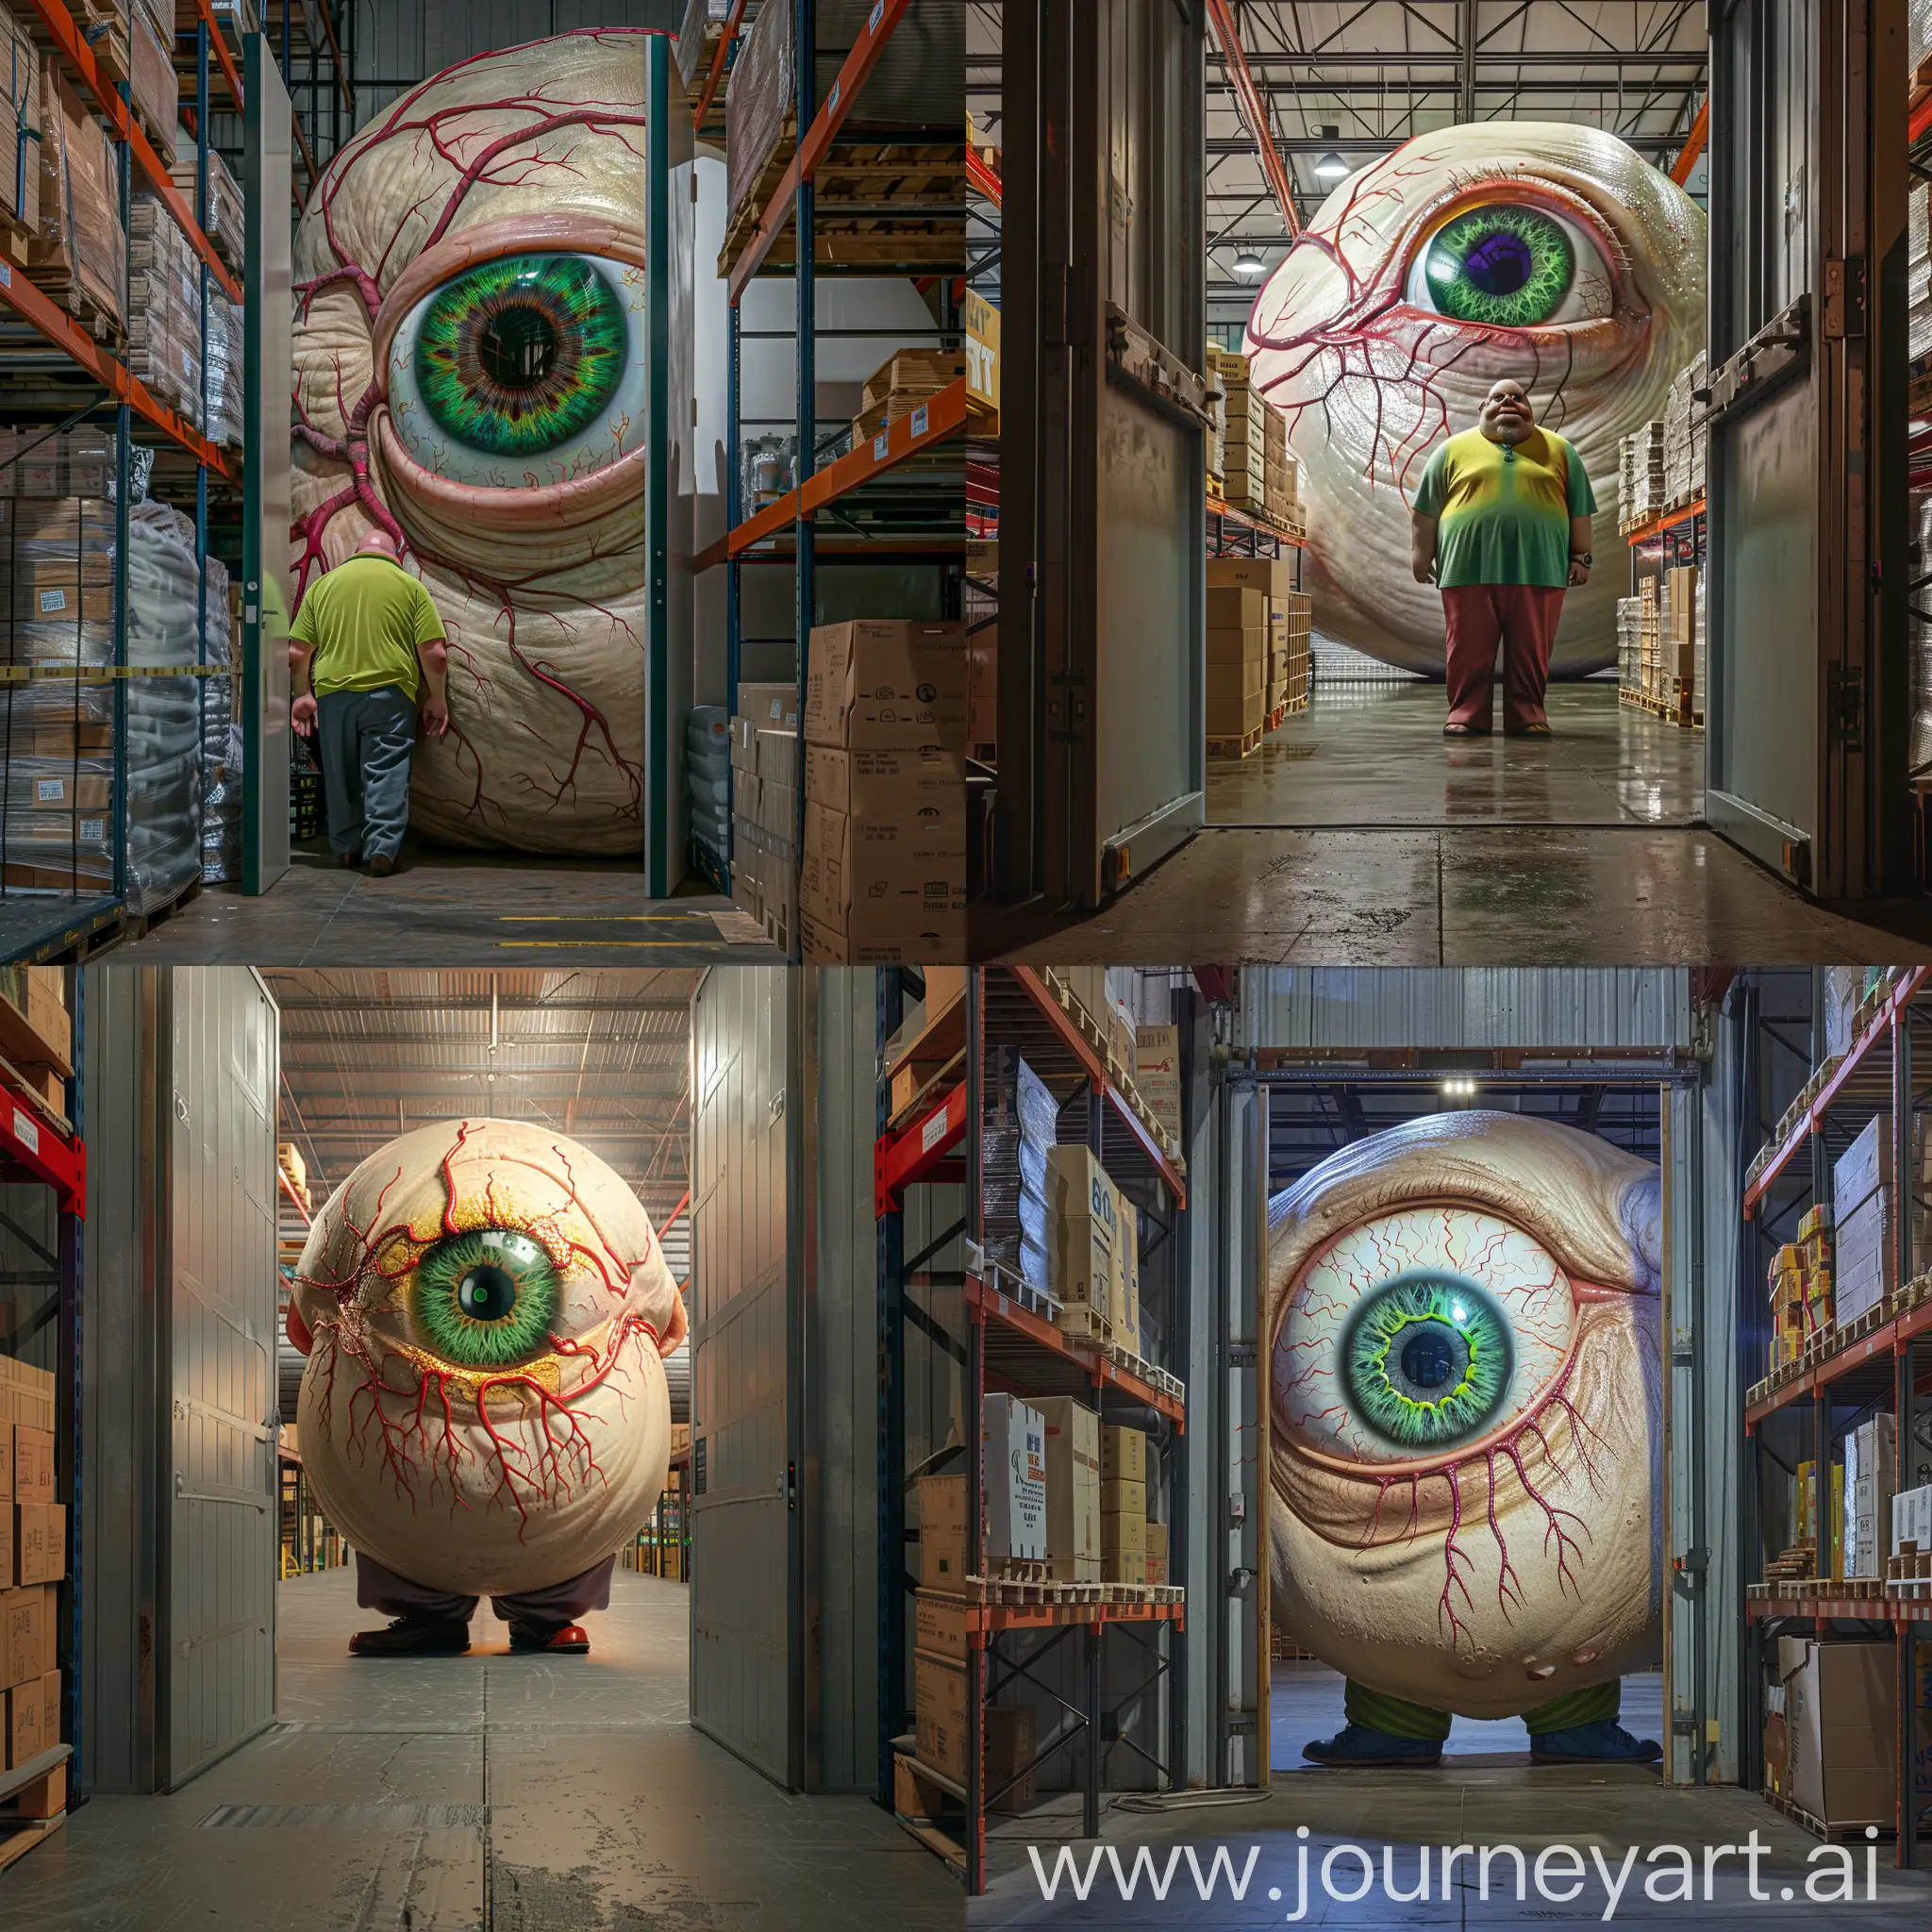 doors from the warehouse to the food court, in the doorway there is a fat man, a colored shirt, instead of a head, a large eye, with veins and arteries, a green pupil, hyper-realism, 8K image quality, ultra detail